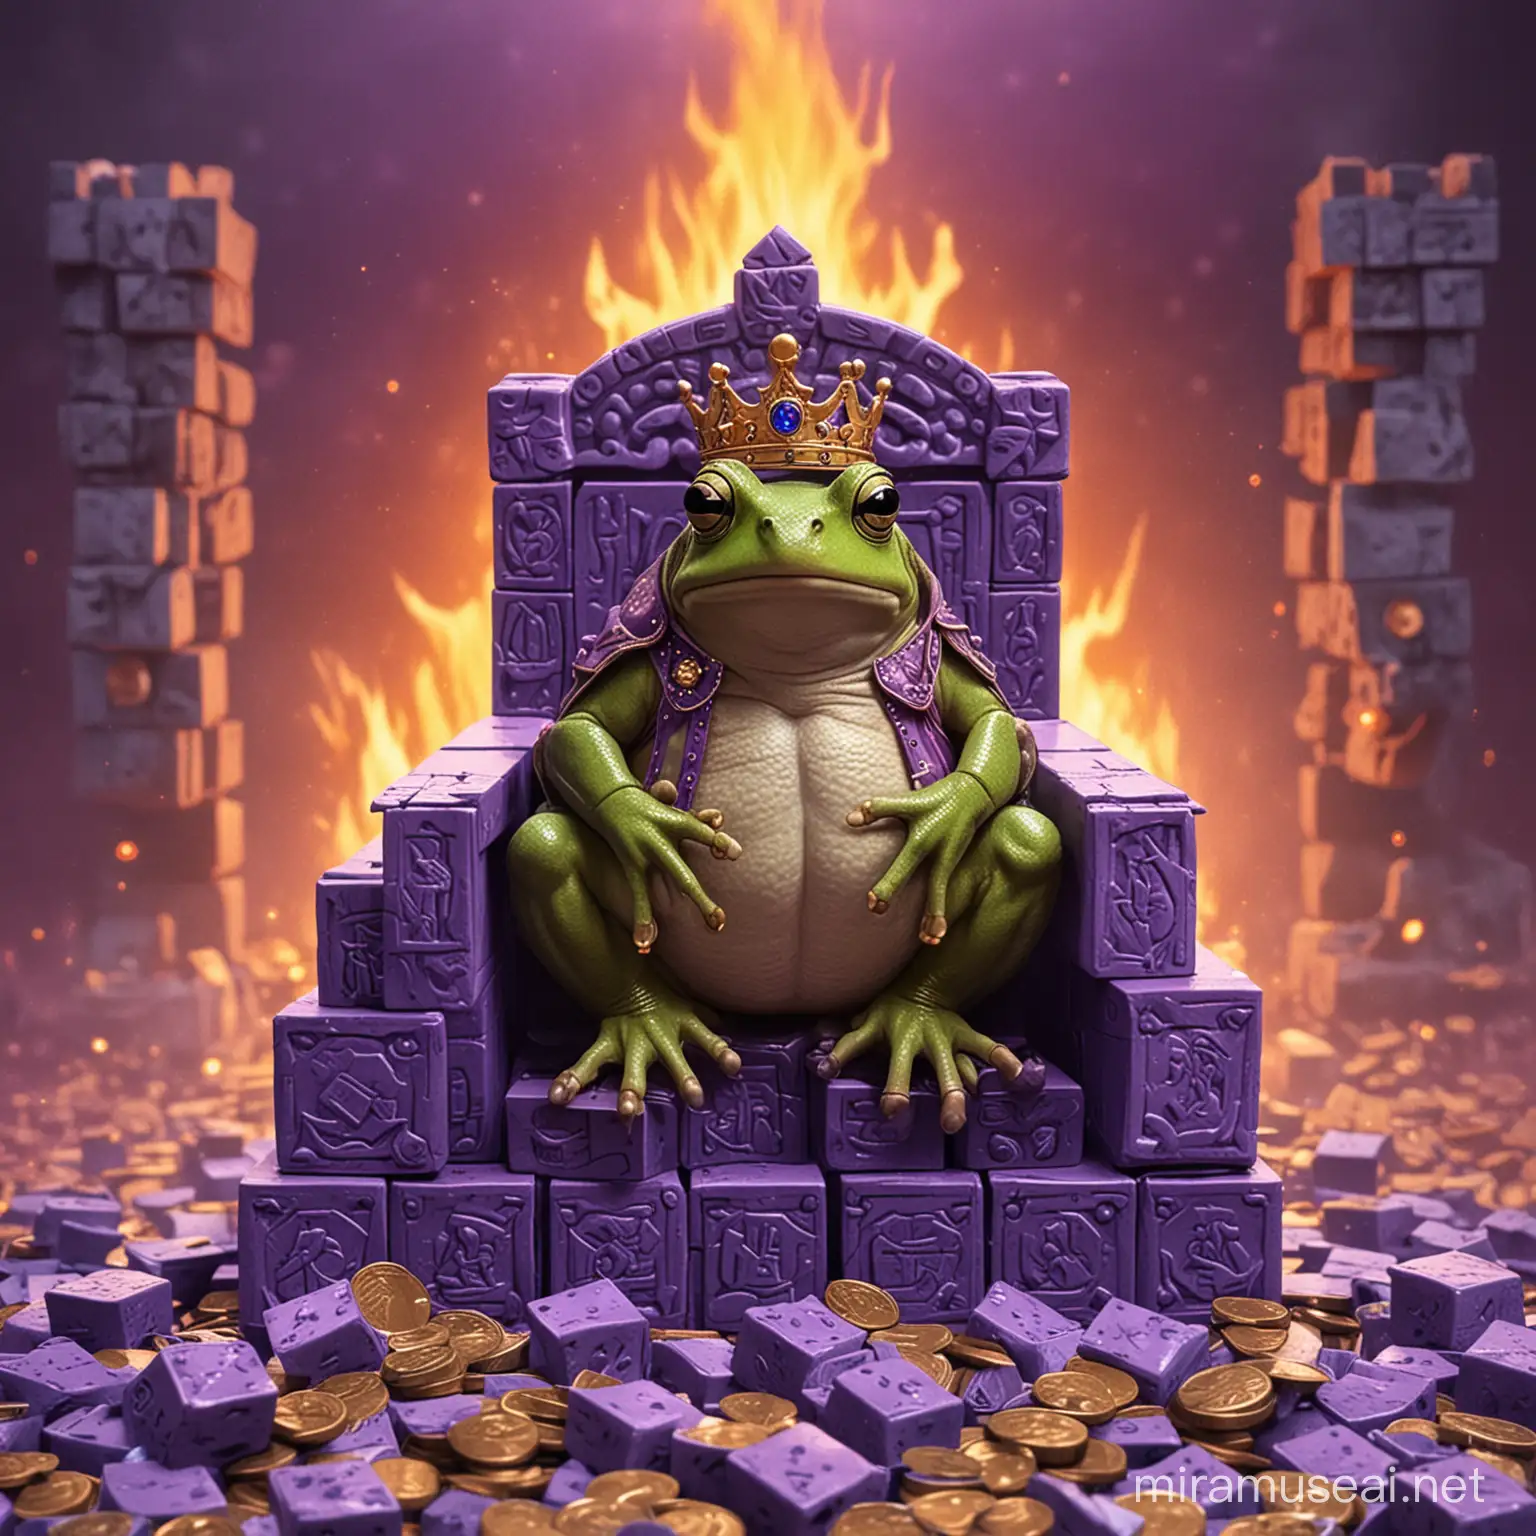 A king frog sat on a throne of purple blocks. The king is holding a floating purple block. There is fire in the background. There are stacks of coins all around.